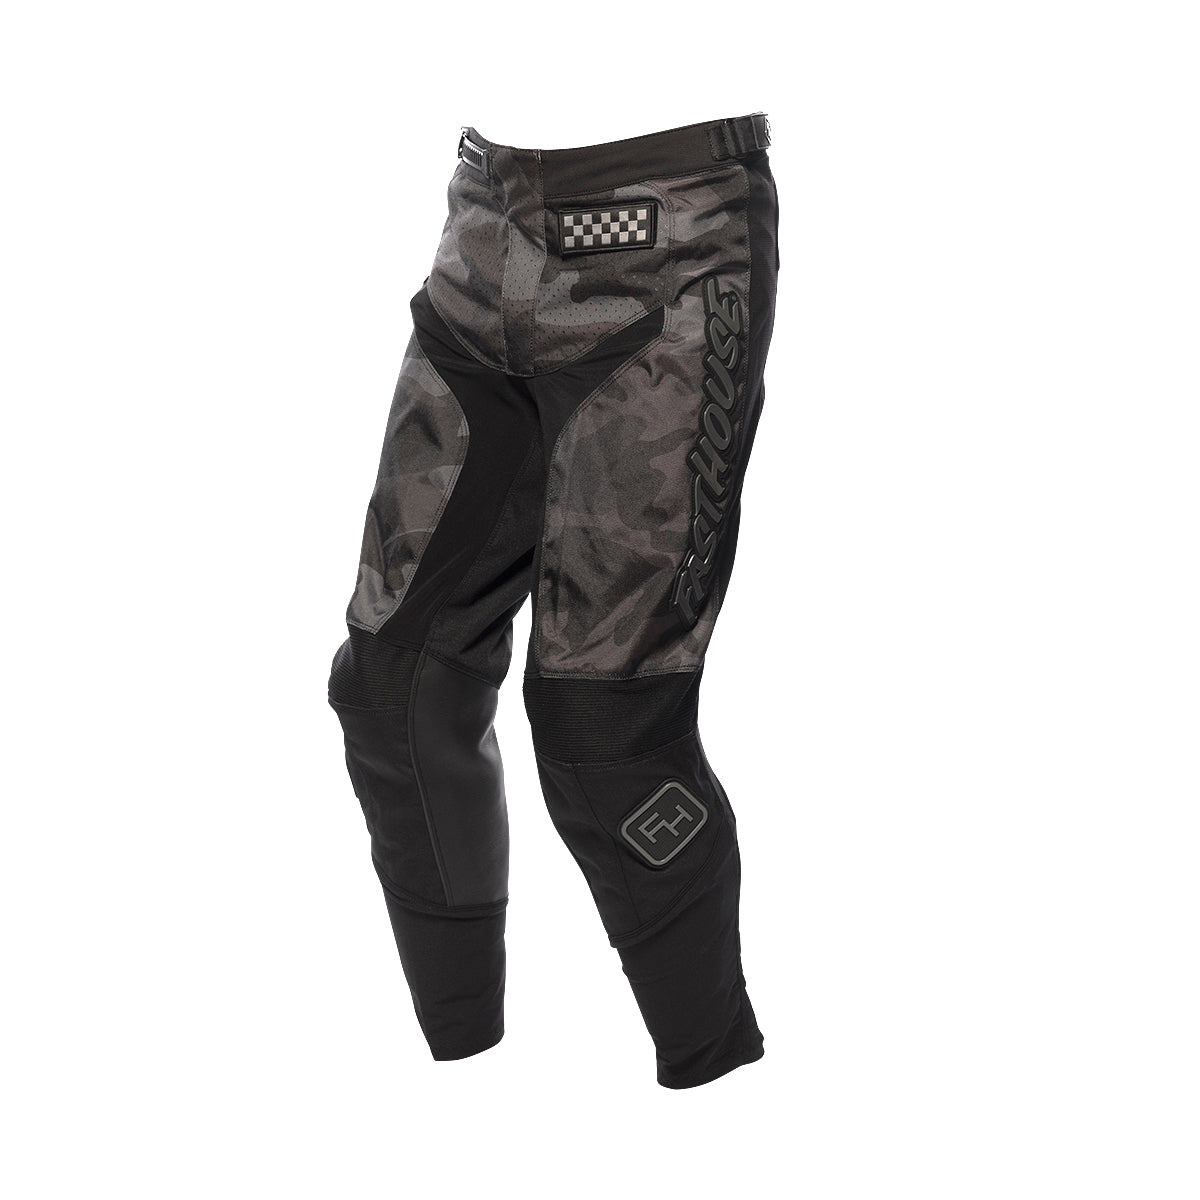 Grindhouse Youth Pant - Camo/Black